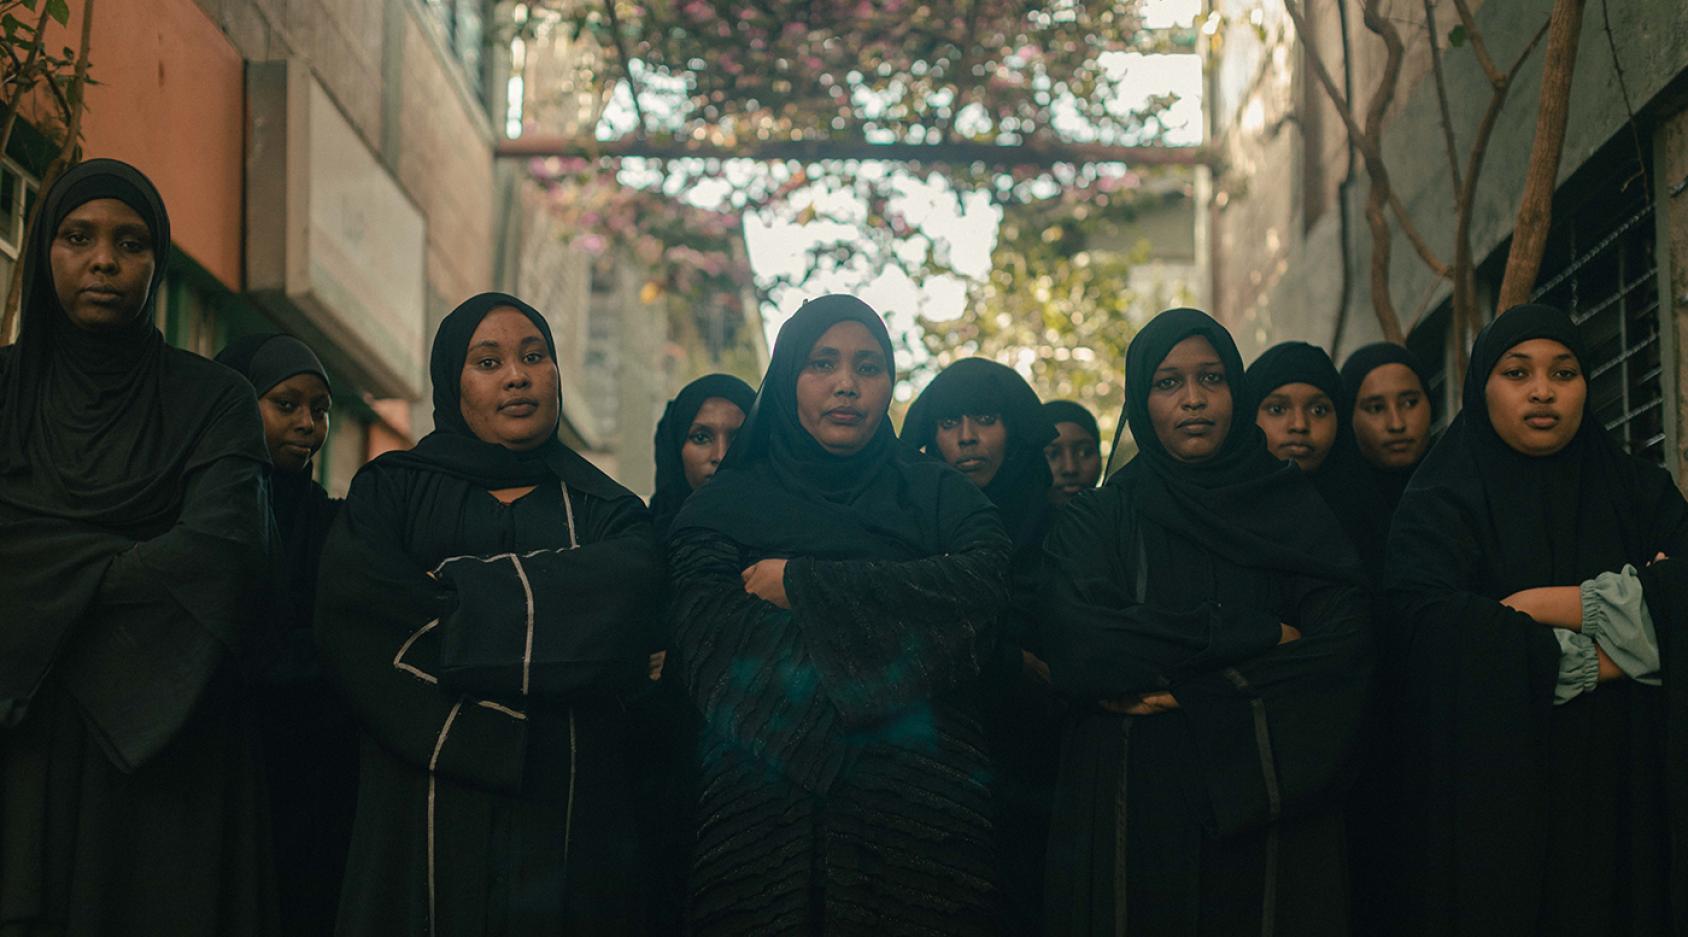 A group of women in black full length abaya clothes standing next to each other.